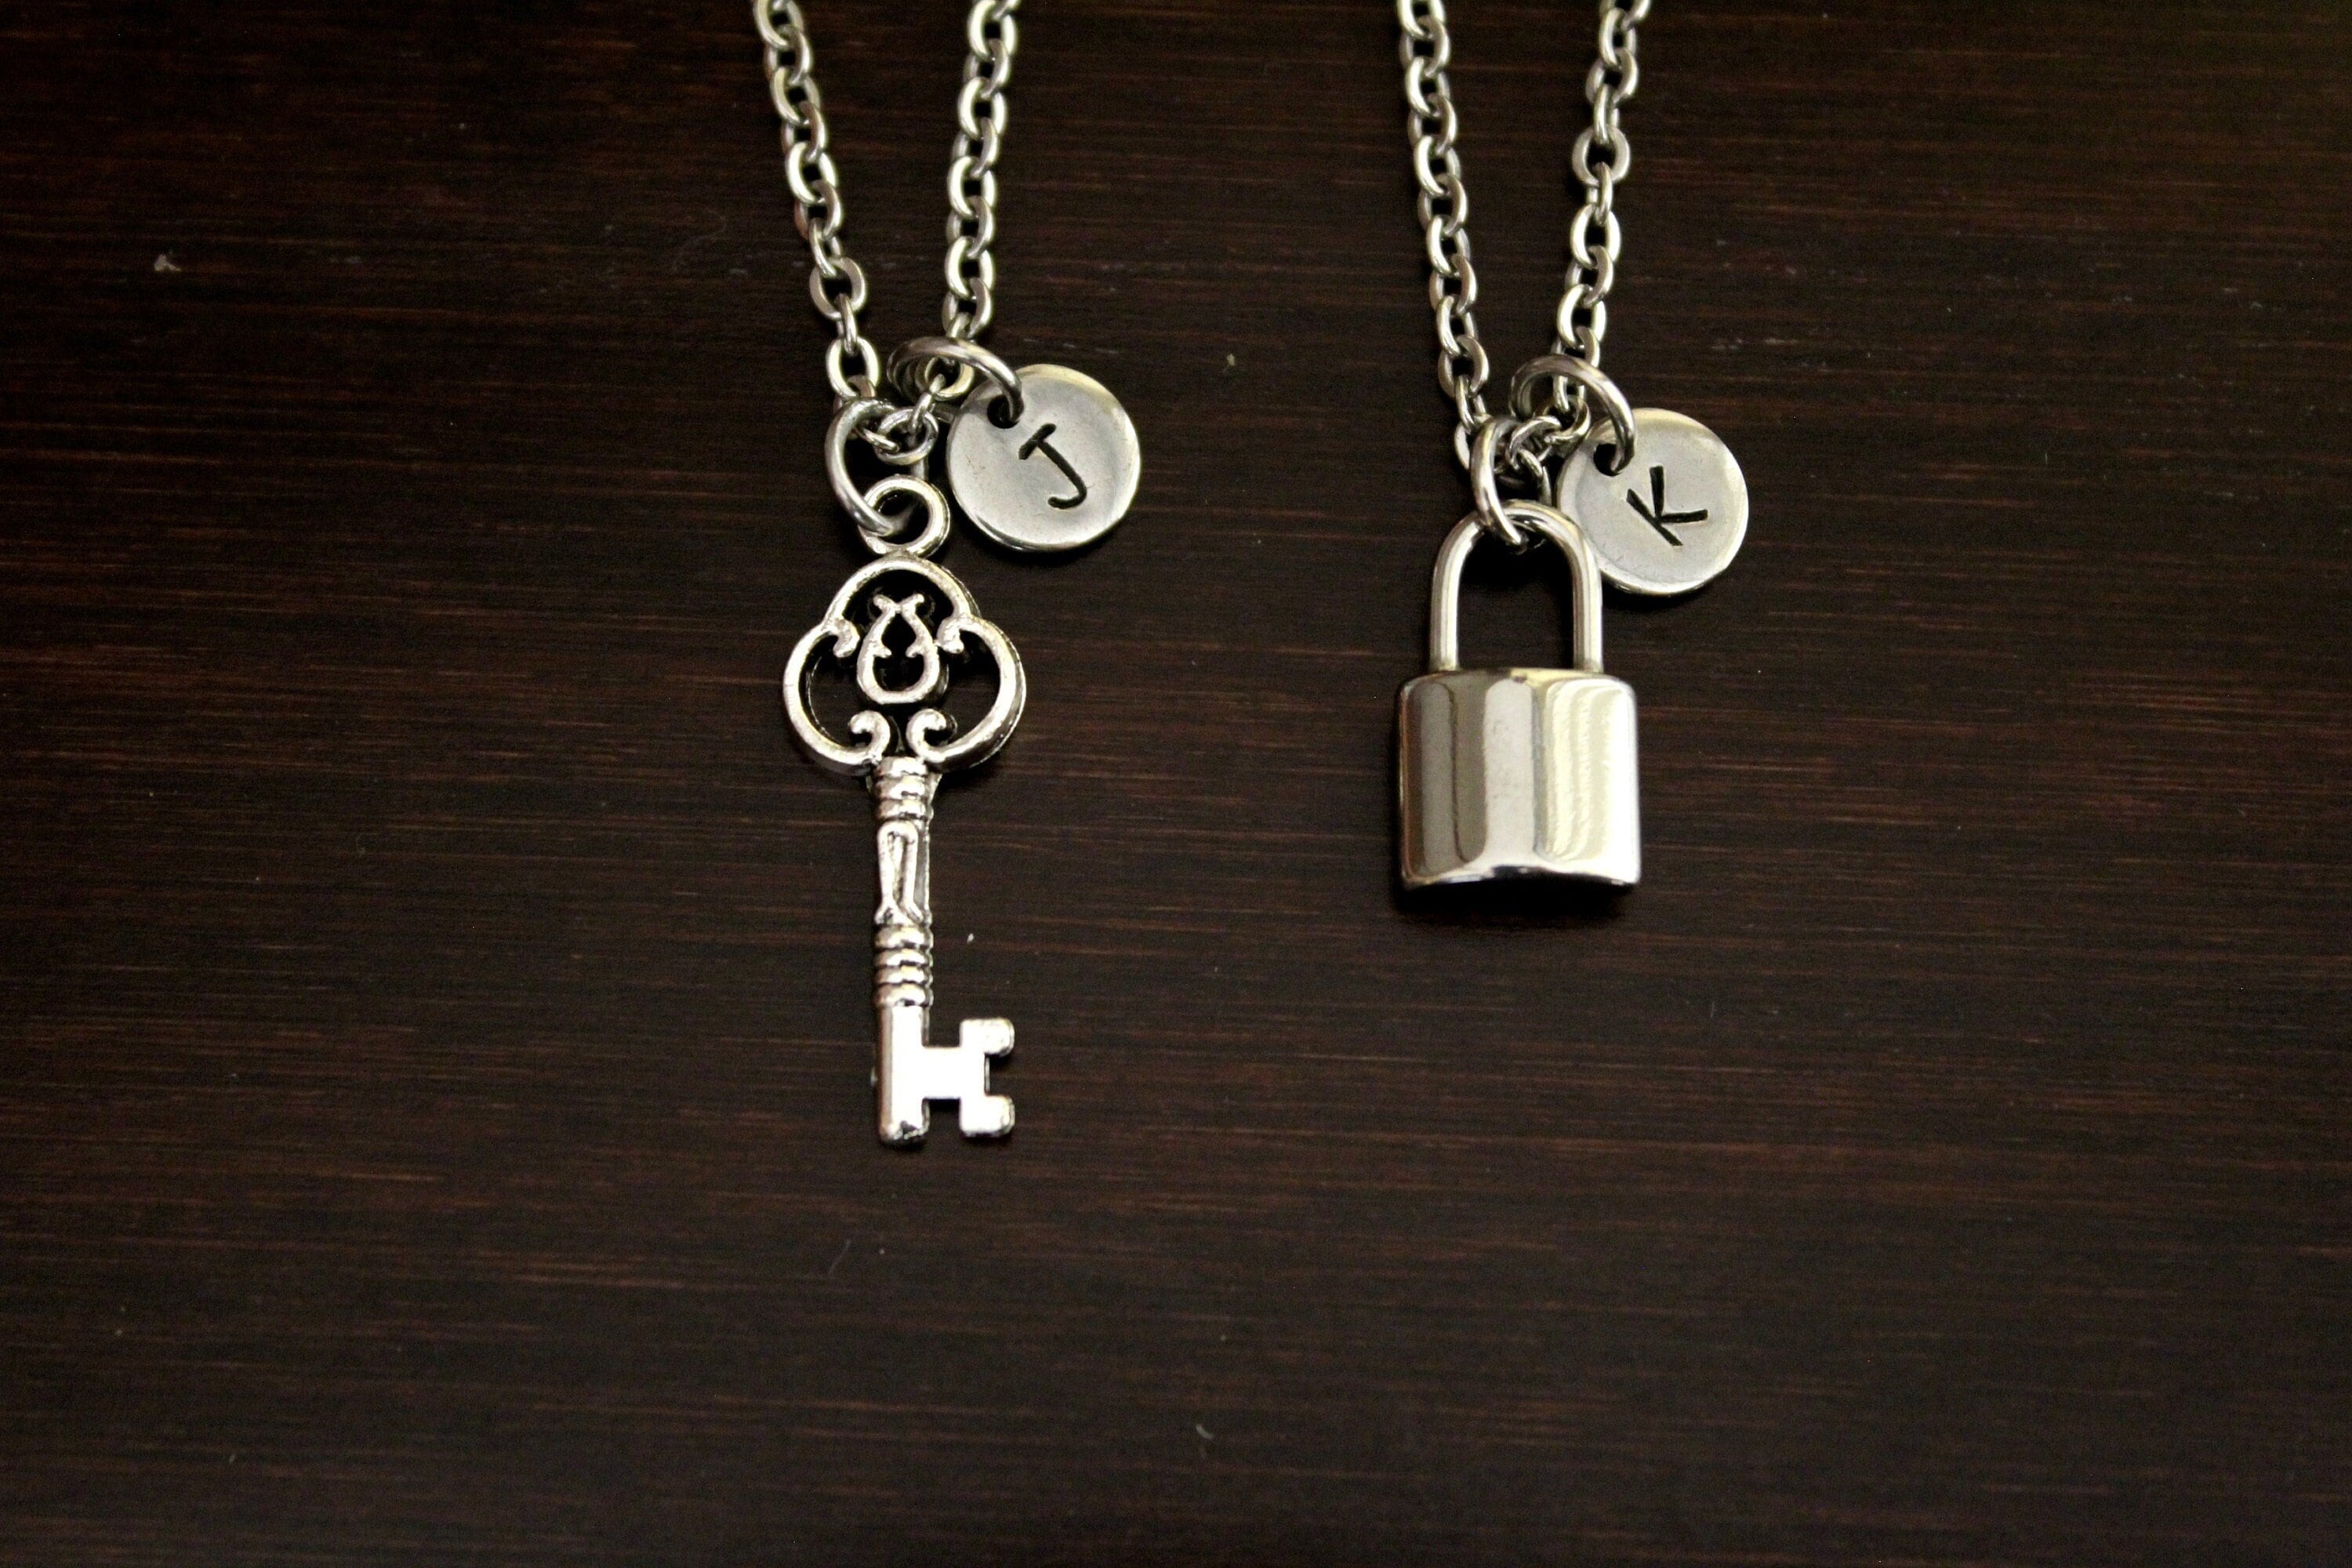 necklace lock and key